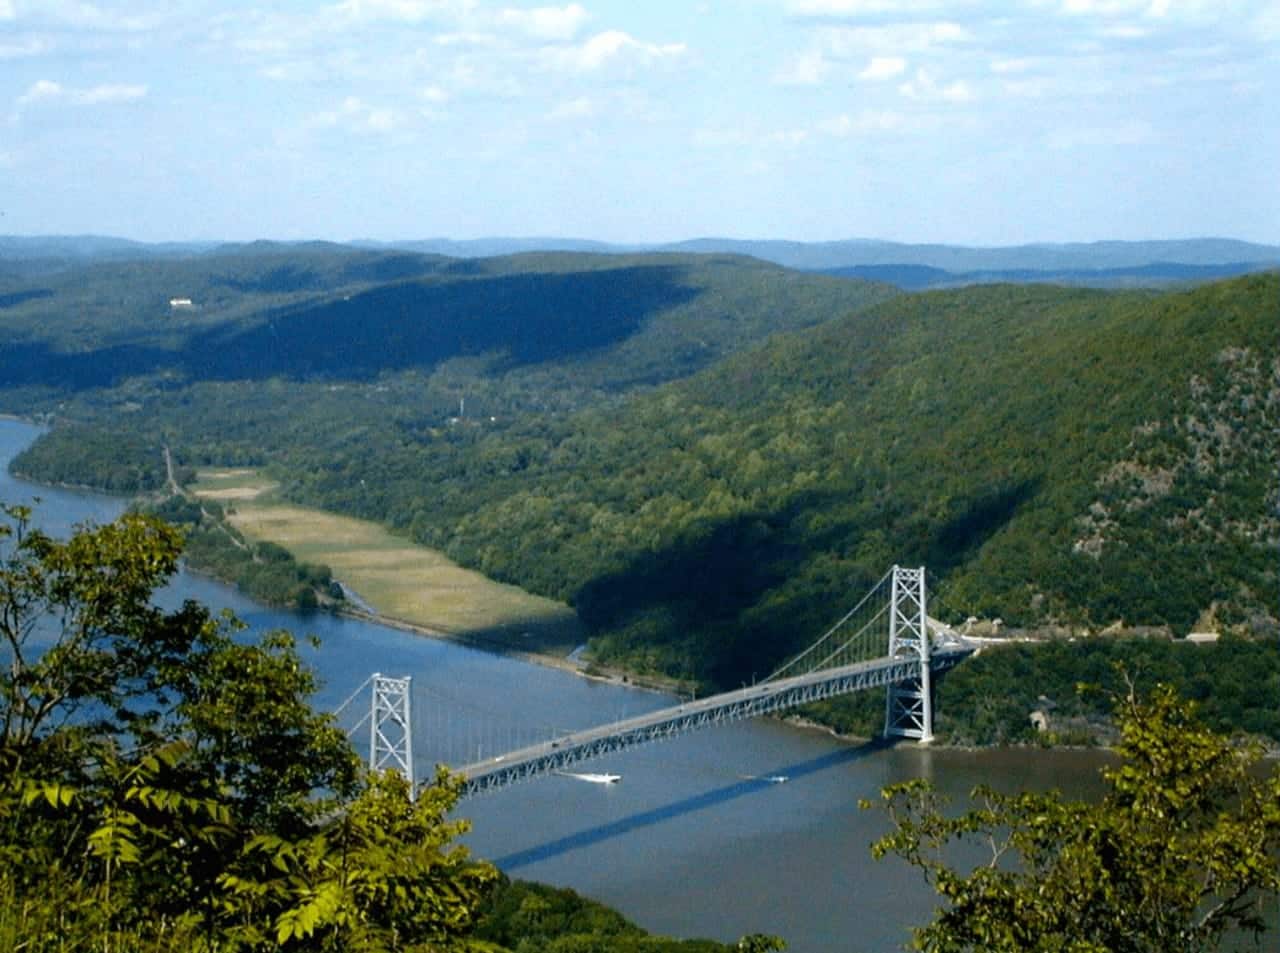 Police are searching for a person who jumped from Bear Mountain Bridge in Rockland County.